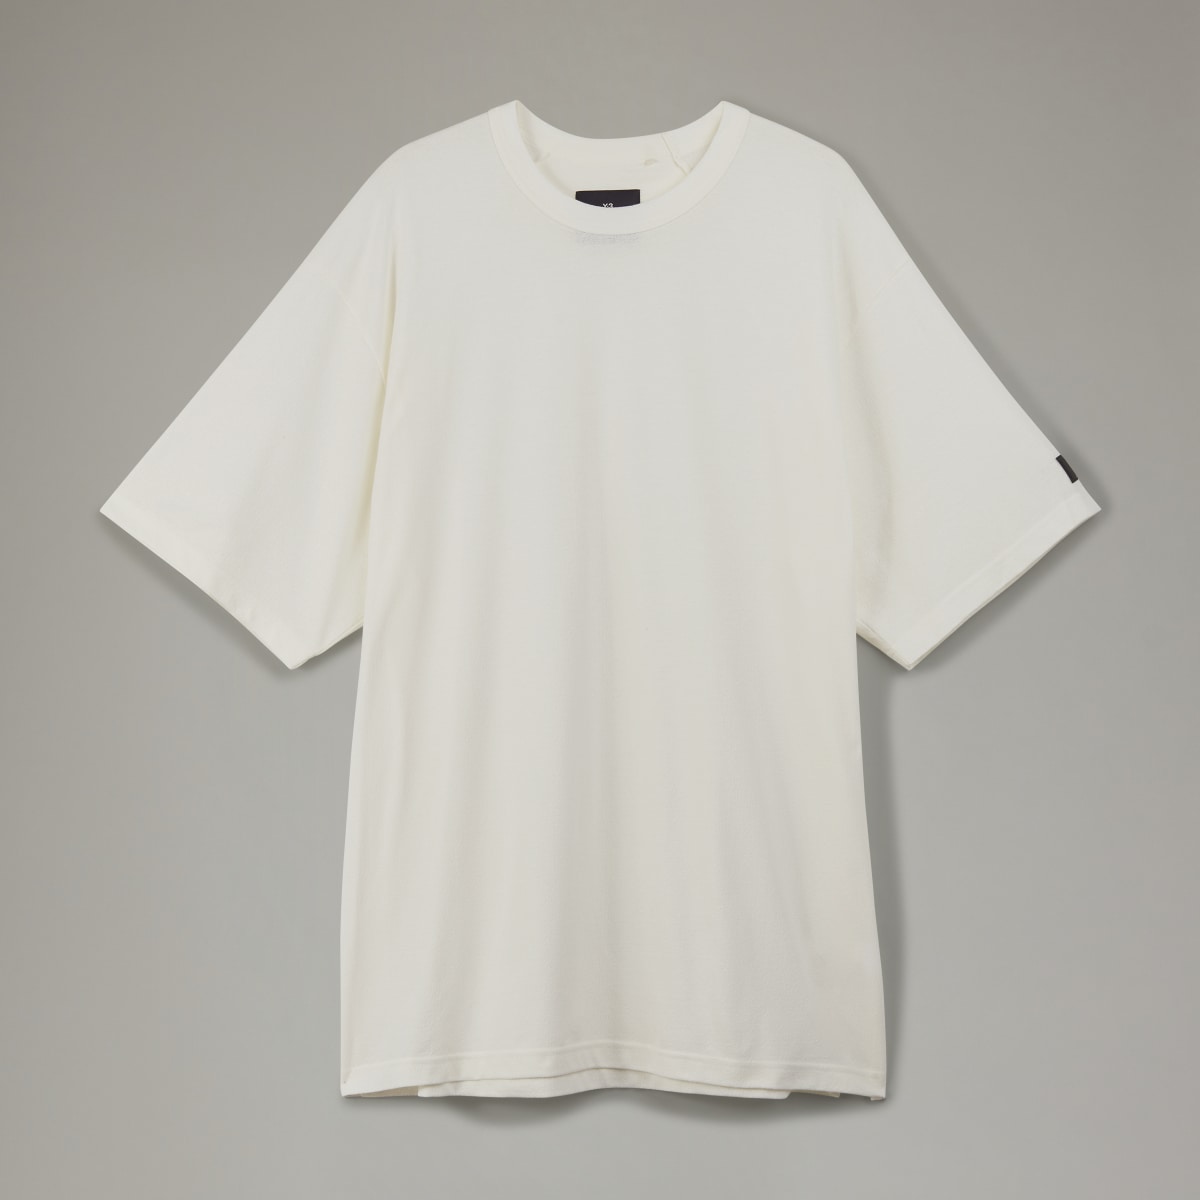 Adidas Y-3 Crepe Jersey T-Shirt. 5